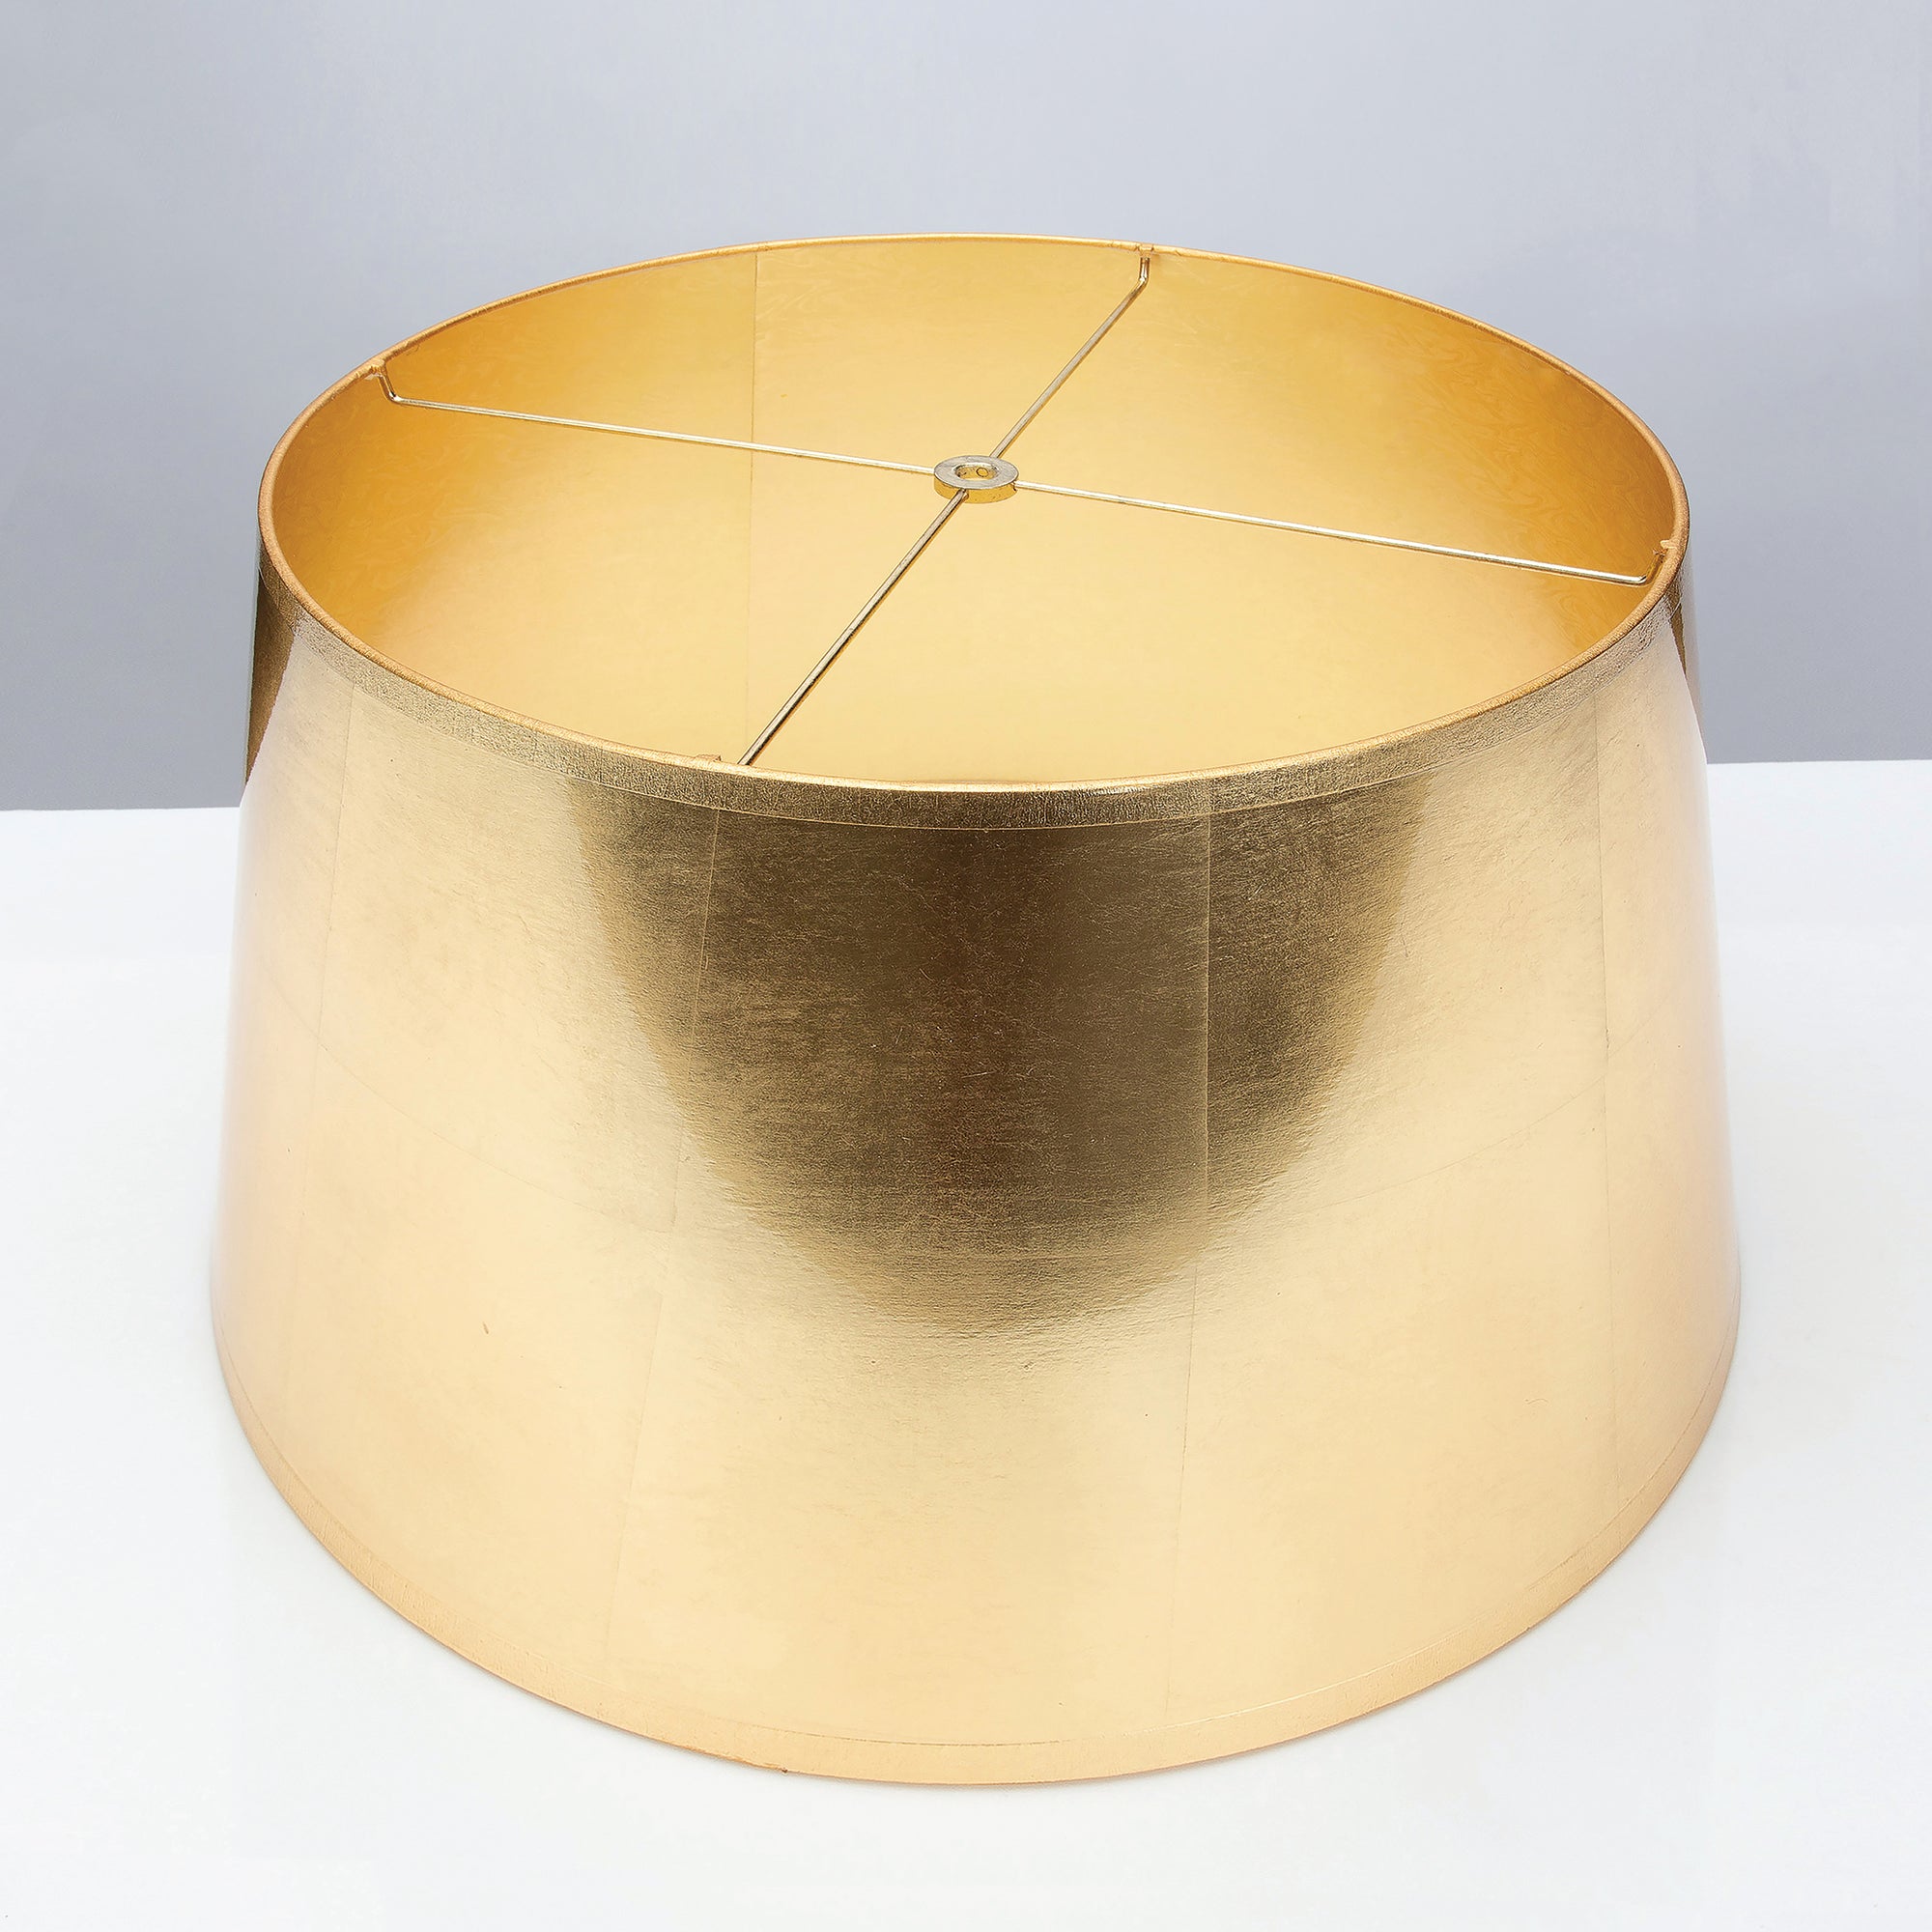 Tapered Gold Foil Lamp Shade 14 X 16 X 10 Couture Lamps